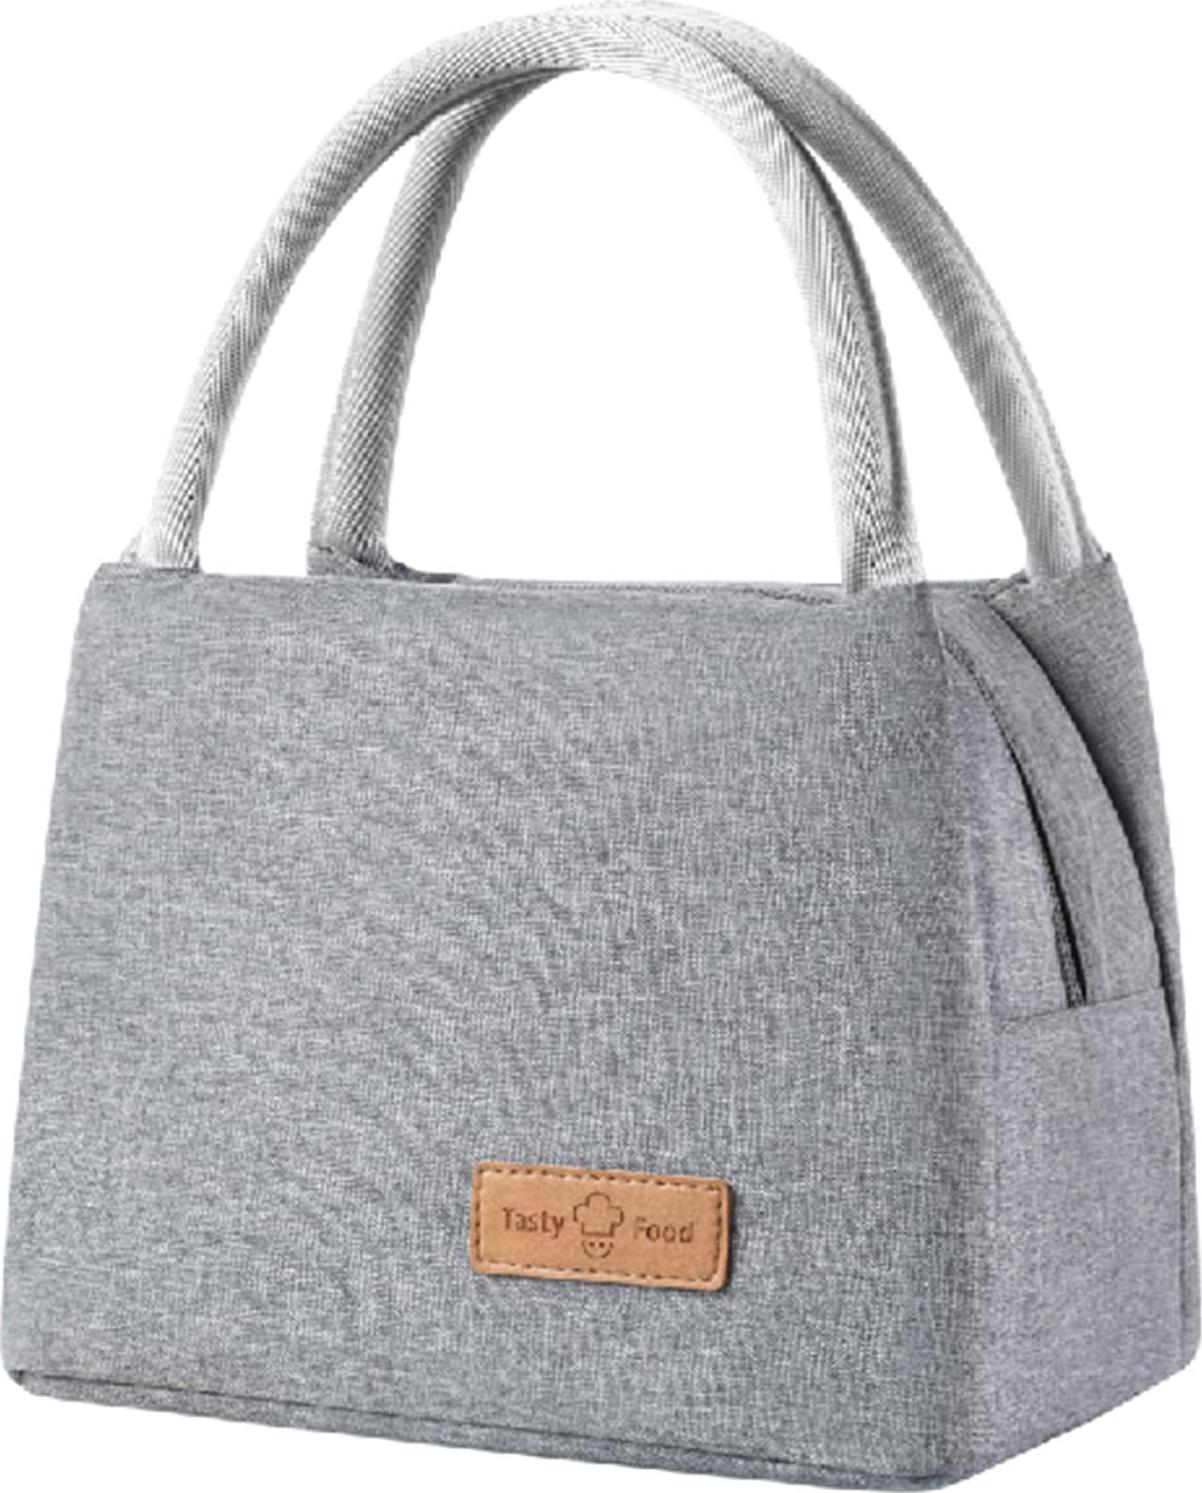 MH MOIHSING, Lunch Bags Cooler Tote for Women Men Kids, MH MOIHSING Portable Insulated Thermal Lunch Tote Bag, Leakproof Lunch Box Canvas Cold Food Container for Office Work School Picnic, Travel Lunchbox - Gray